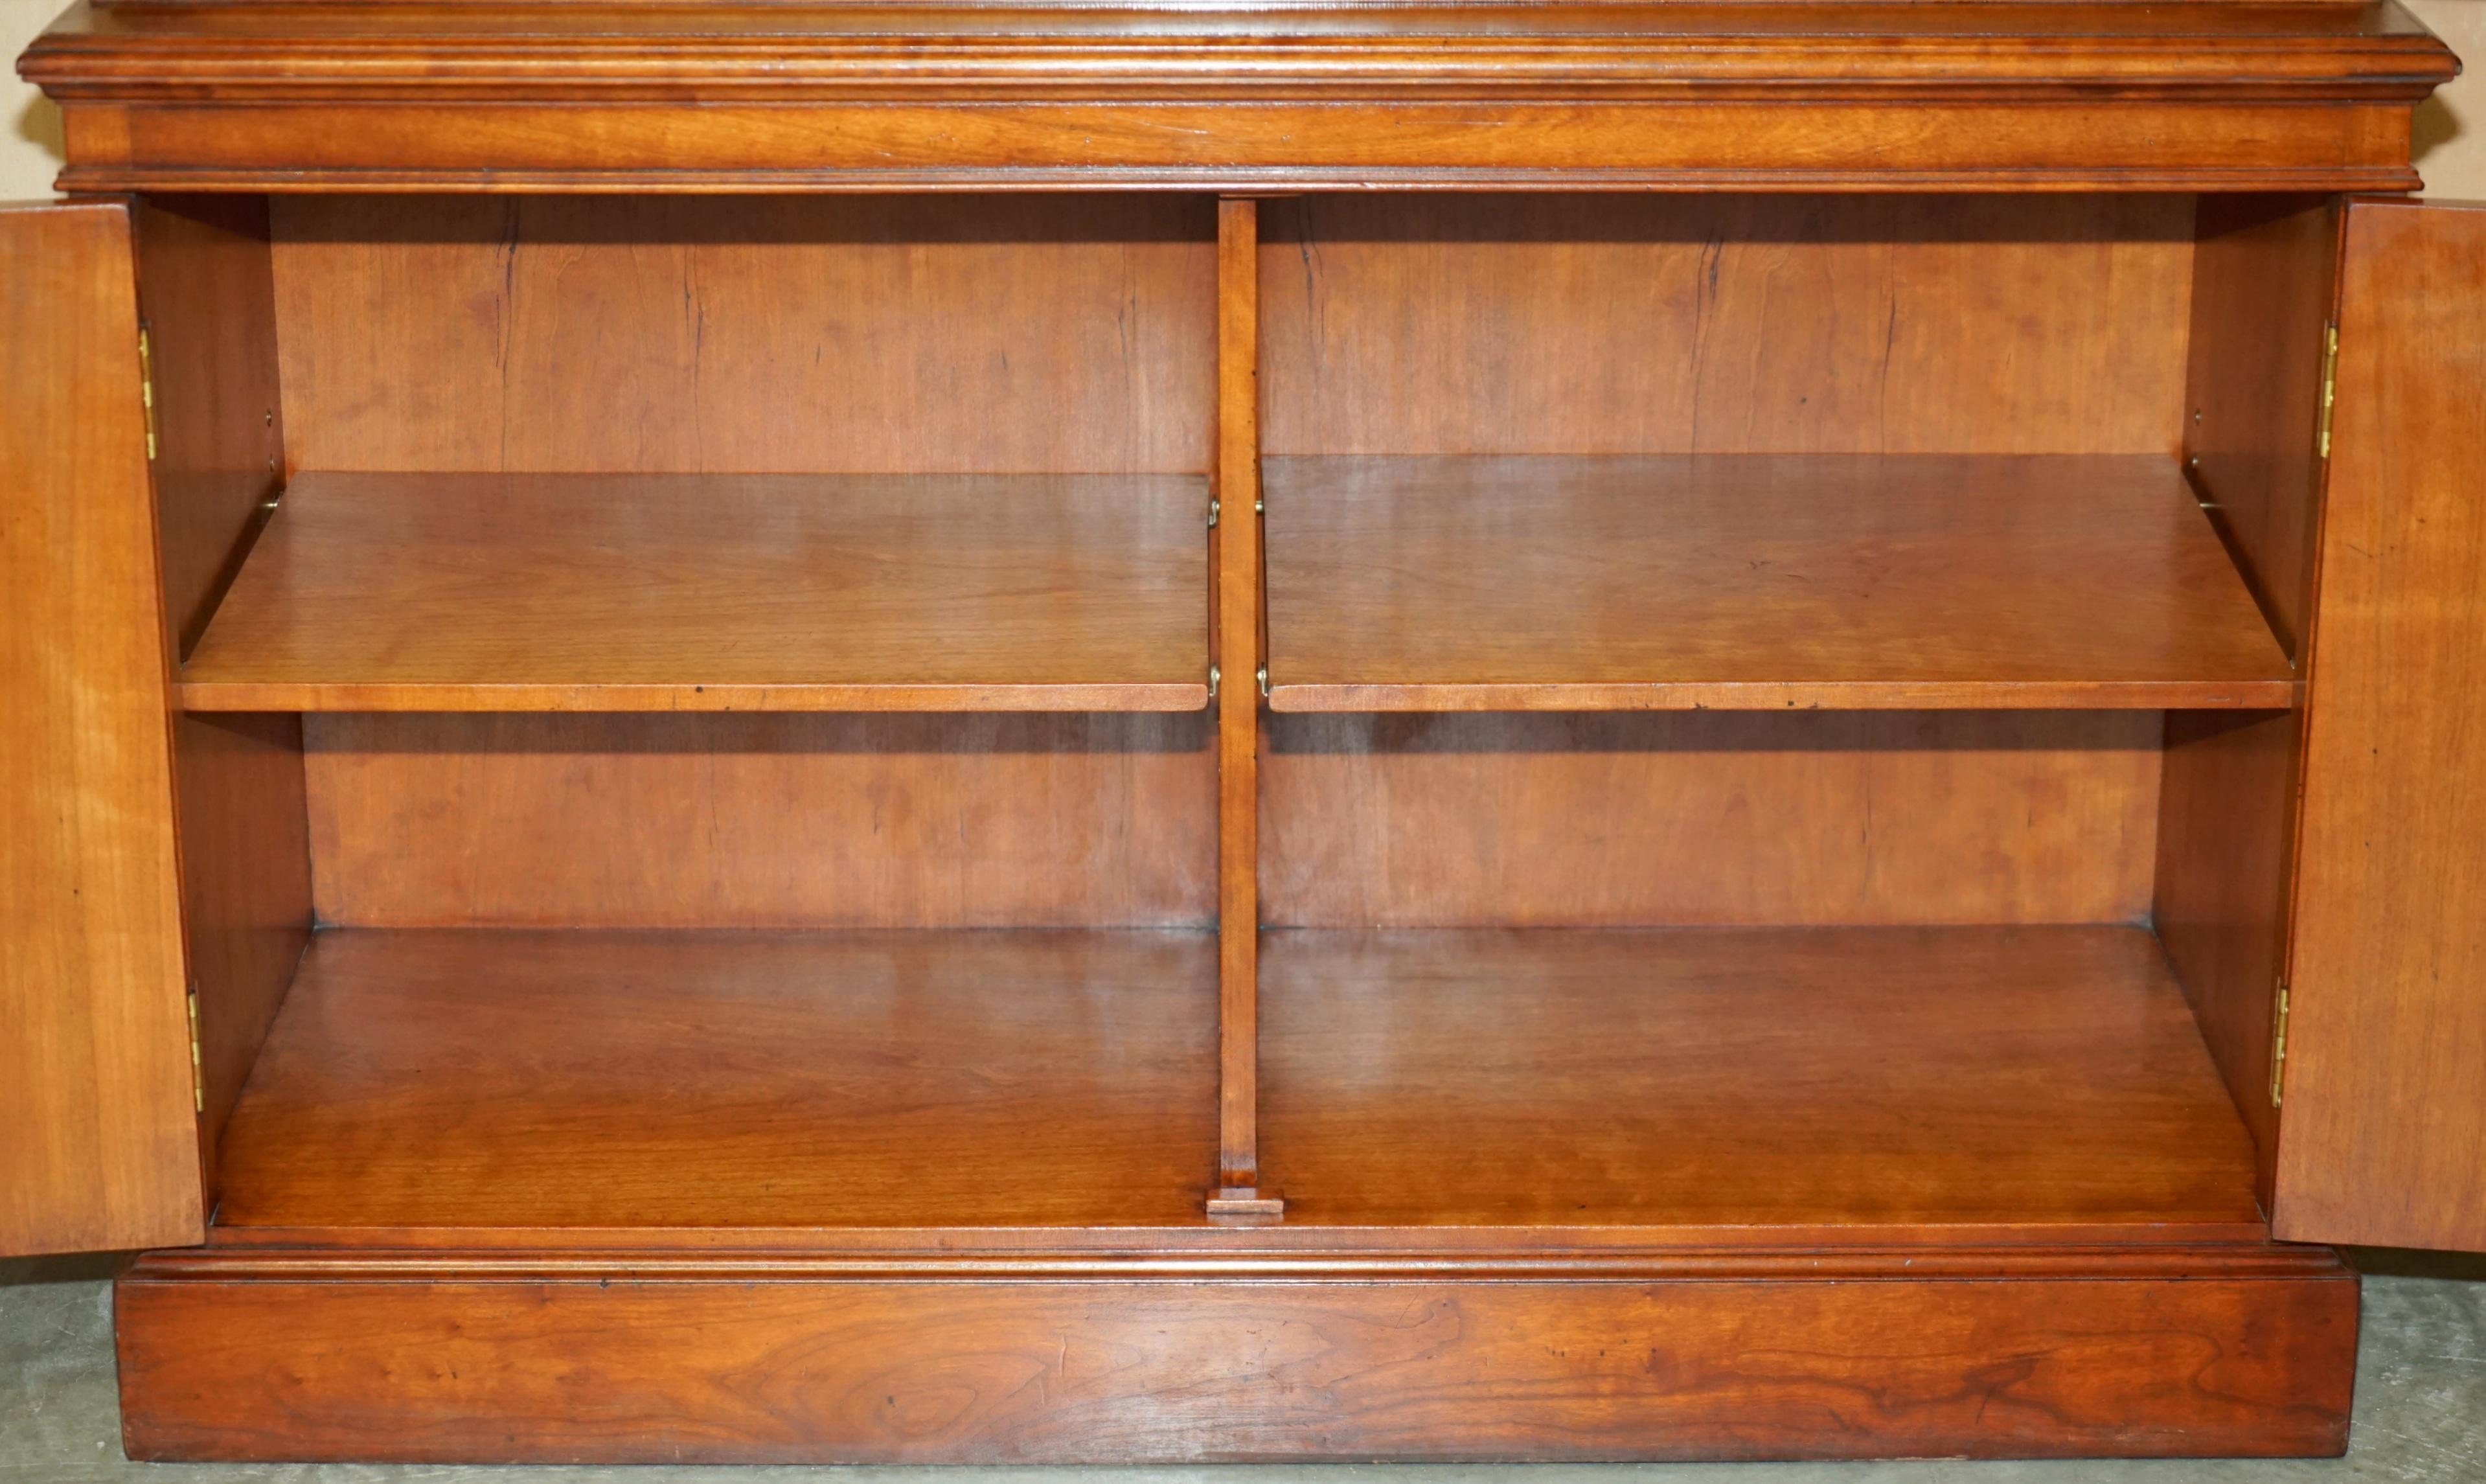 HARRODS LONDON REH KENNEDY ASTRAL GLAZED LiBRARY BOOKCASE CUPBOARD STORAGE UNIT For Sale 12